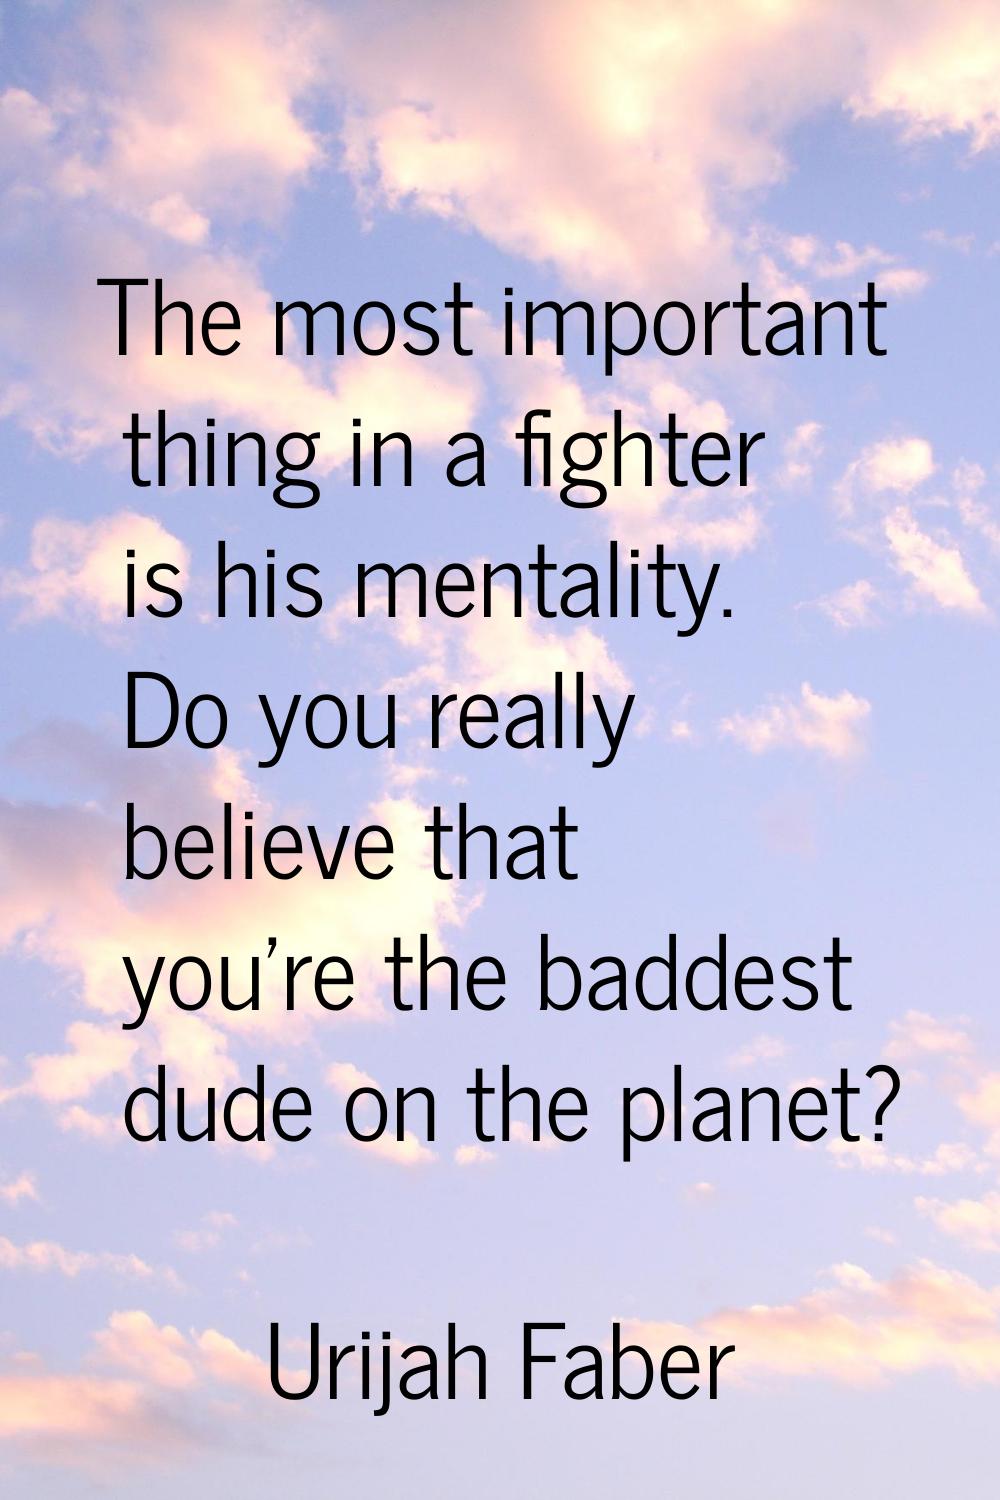 The most important thing in a fighter is his mentality. Do you really believe that you're the badde